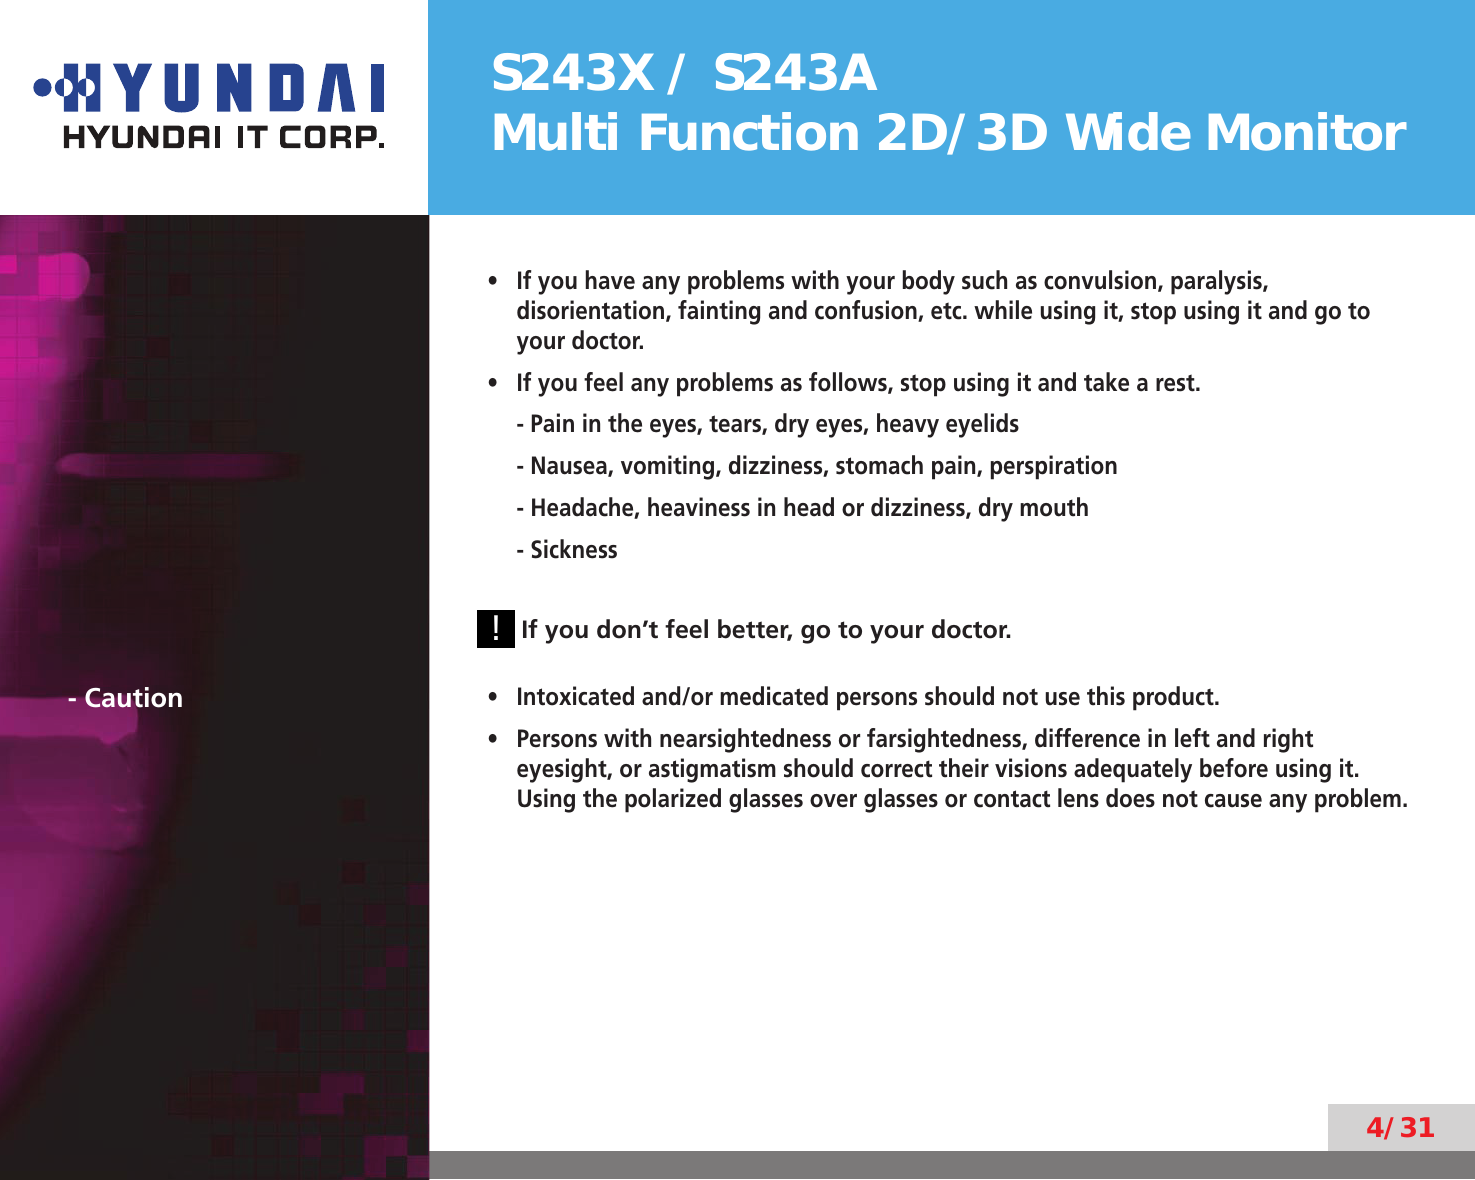 S243X / S243AMulti Function 2D/3D Wide Monitor4/31If you have any problems with your body such as convulsion, paralysis, • disorientation, fainting and confusion, etc. while using it, stop using it and go to your doctor.If you feel any problems as follows, stop using it and take a rest.• - Pain in the eyes, tears, dry eyes, heavy eyelids- Nausea, vomiting, dizziness, stomach pain, perspiration- Headache, heaviness in head or dizziness, dry mouth- Sickness        ! If you don’t feel better, go to your doctor.- CautionIntoxicated and/or medicated persons should not use this product.• Persons with nearsightedness or farsightedness, difference in left and right • eyesight, or astigmatism should correct their visions adequately before using it. Using the polarized glasses over glasses or contact lens does not cause any problem.